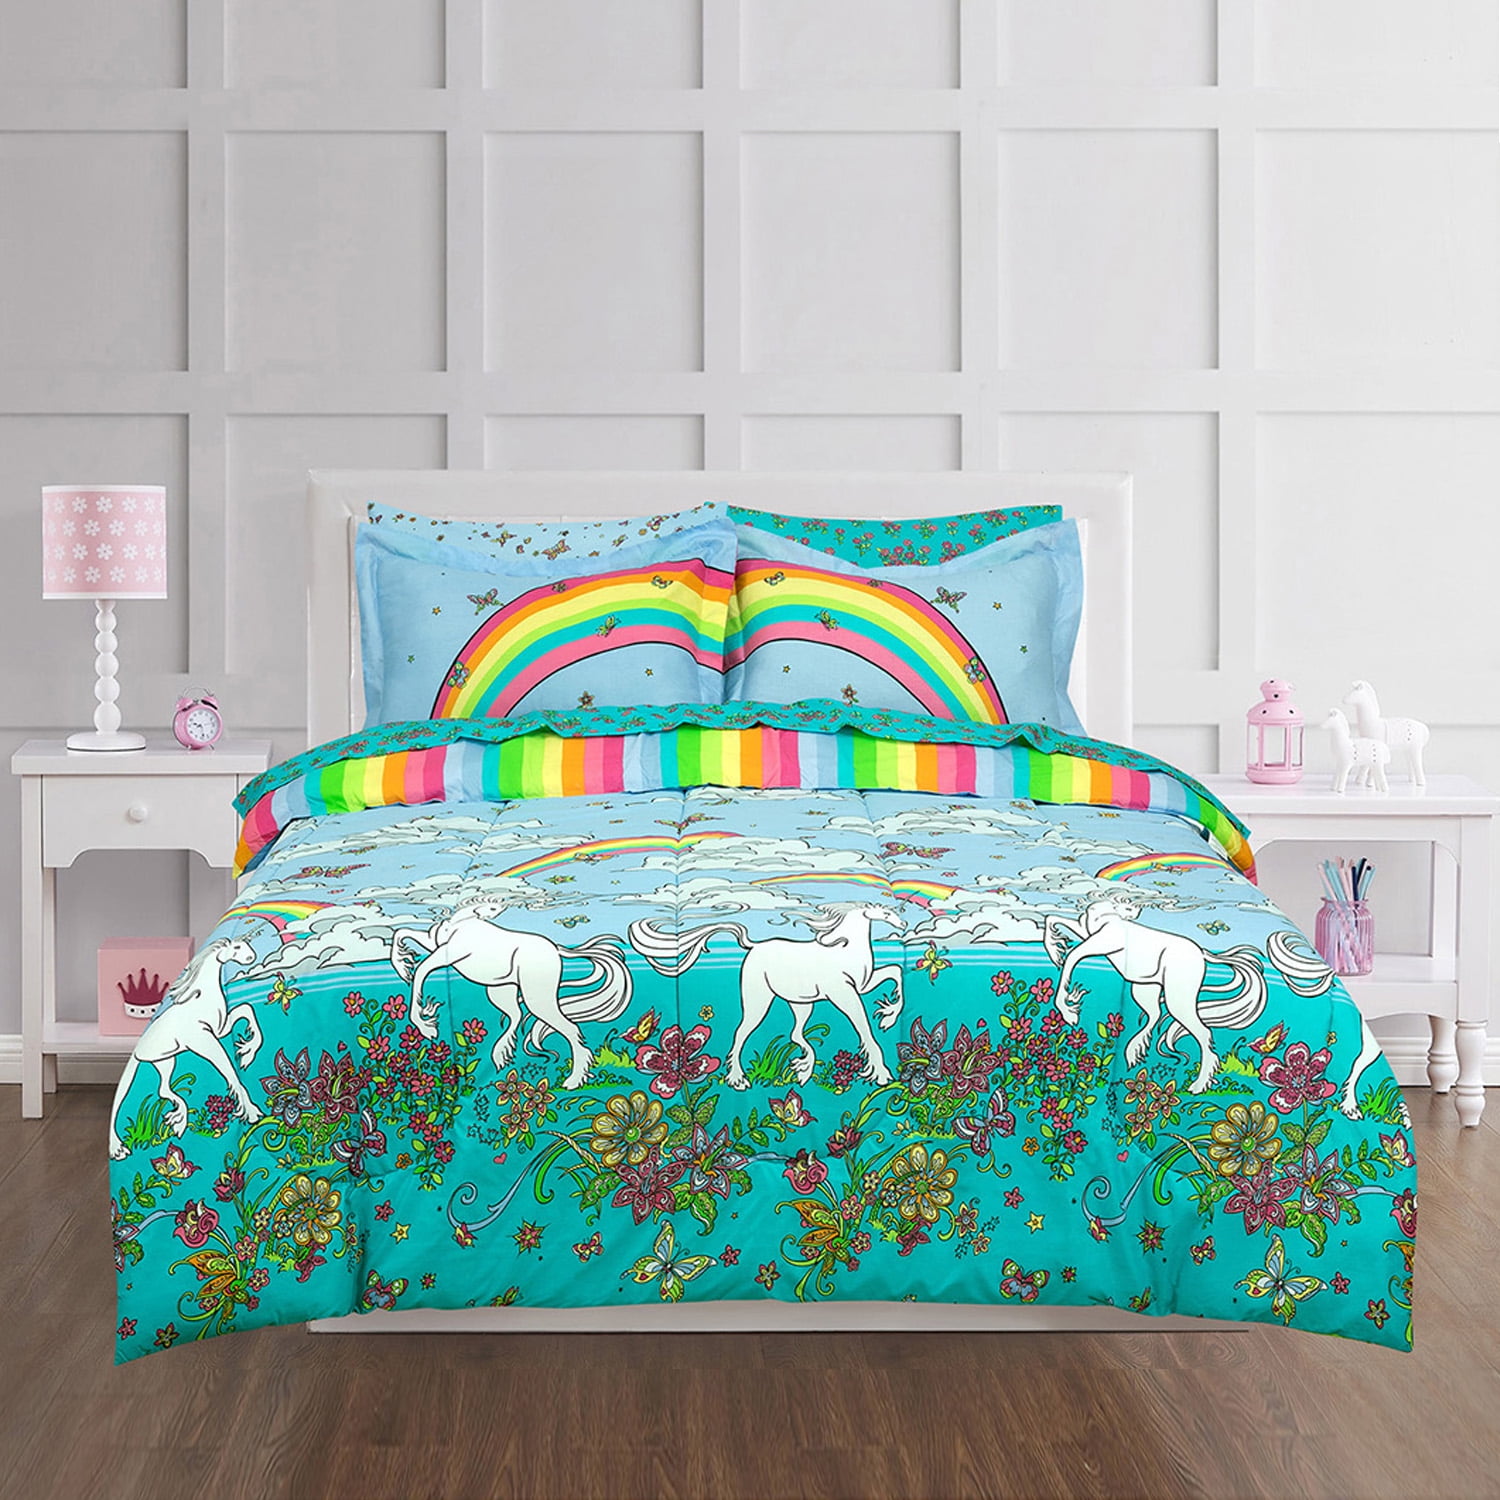 Butterfly Flower Printing Bed Skirt Pillowcases Bed Sheet Bedroom Bedding New 